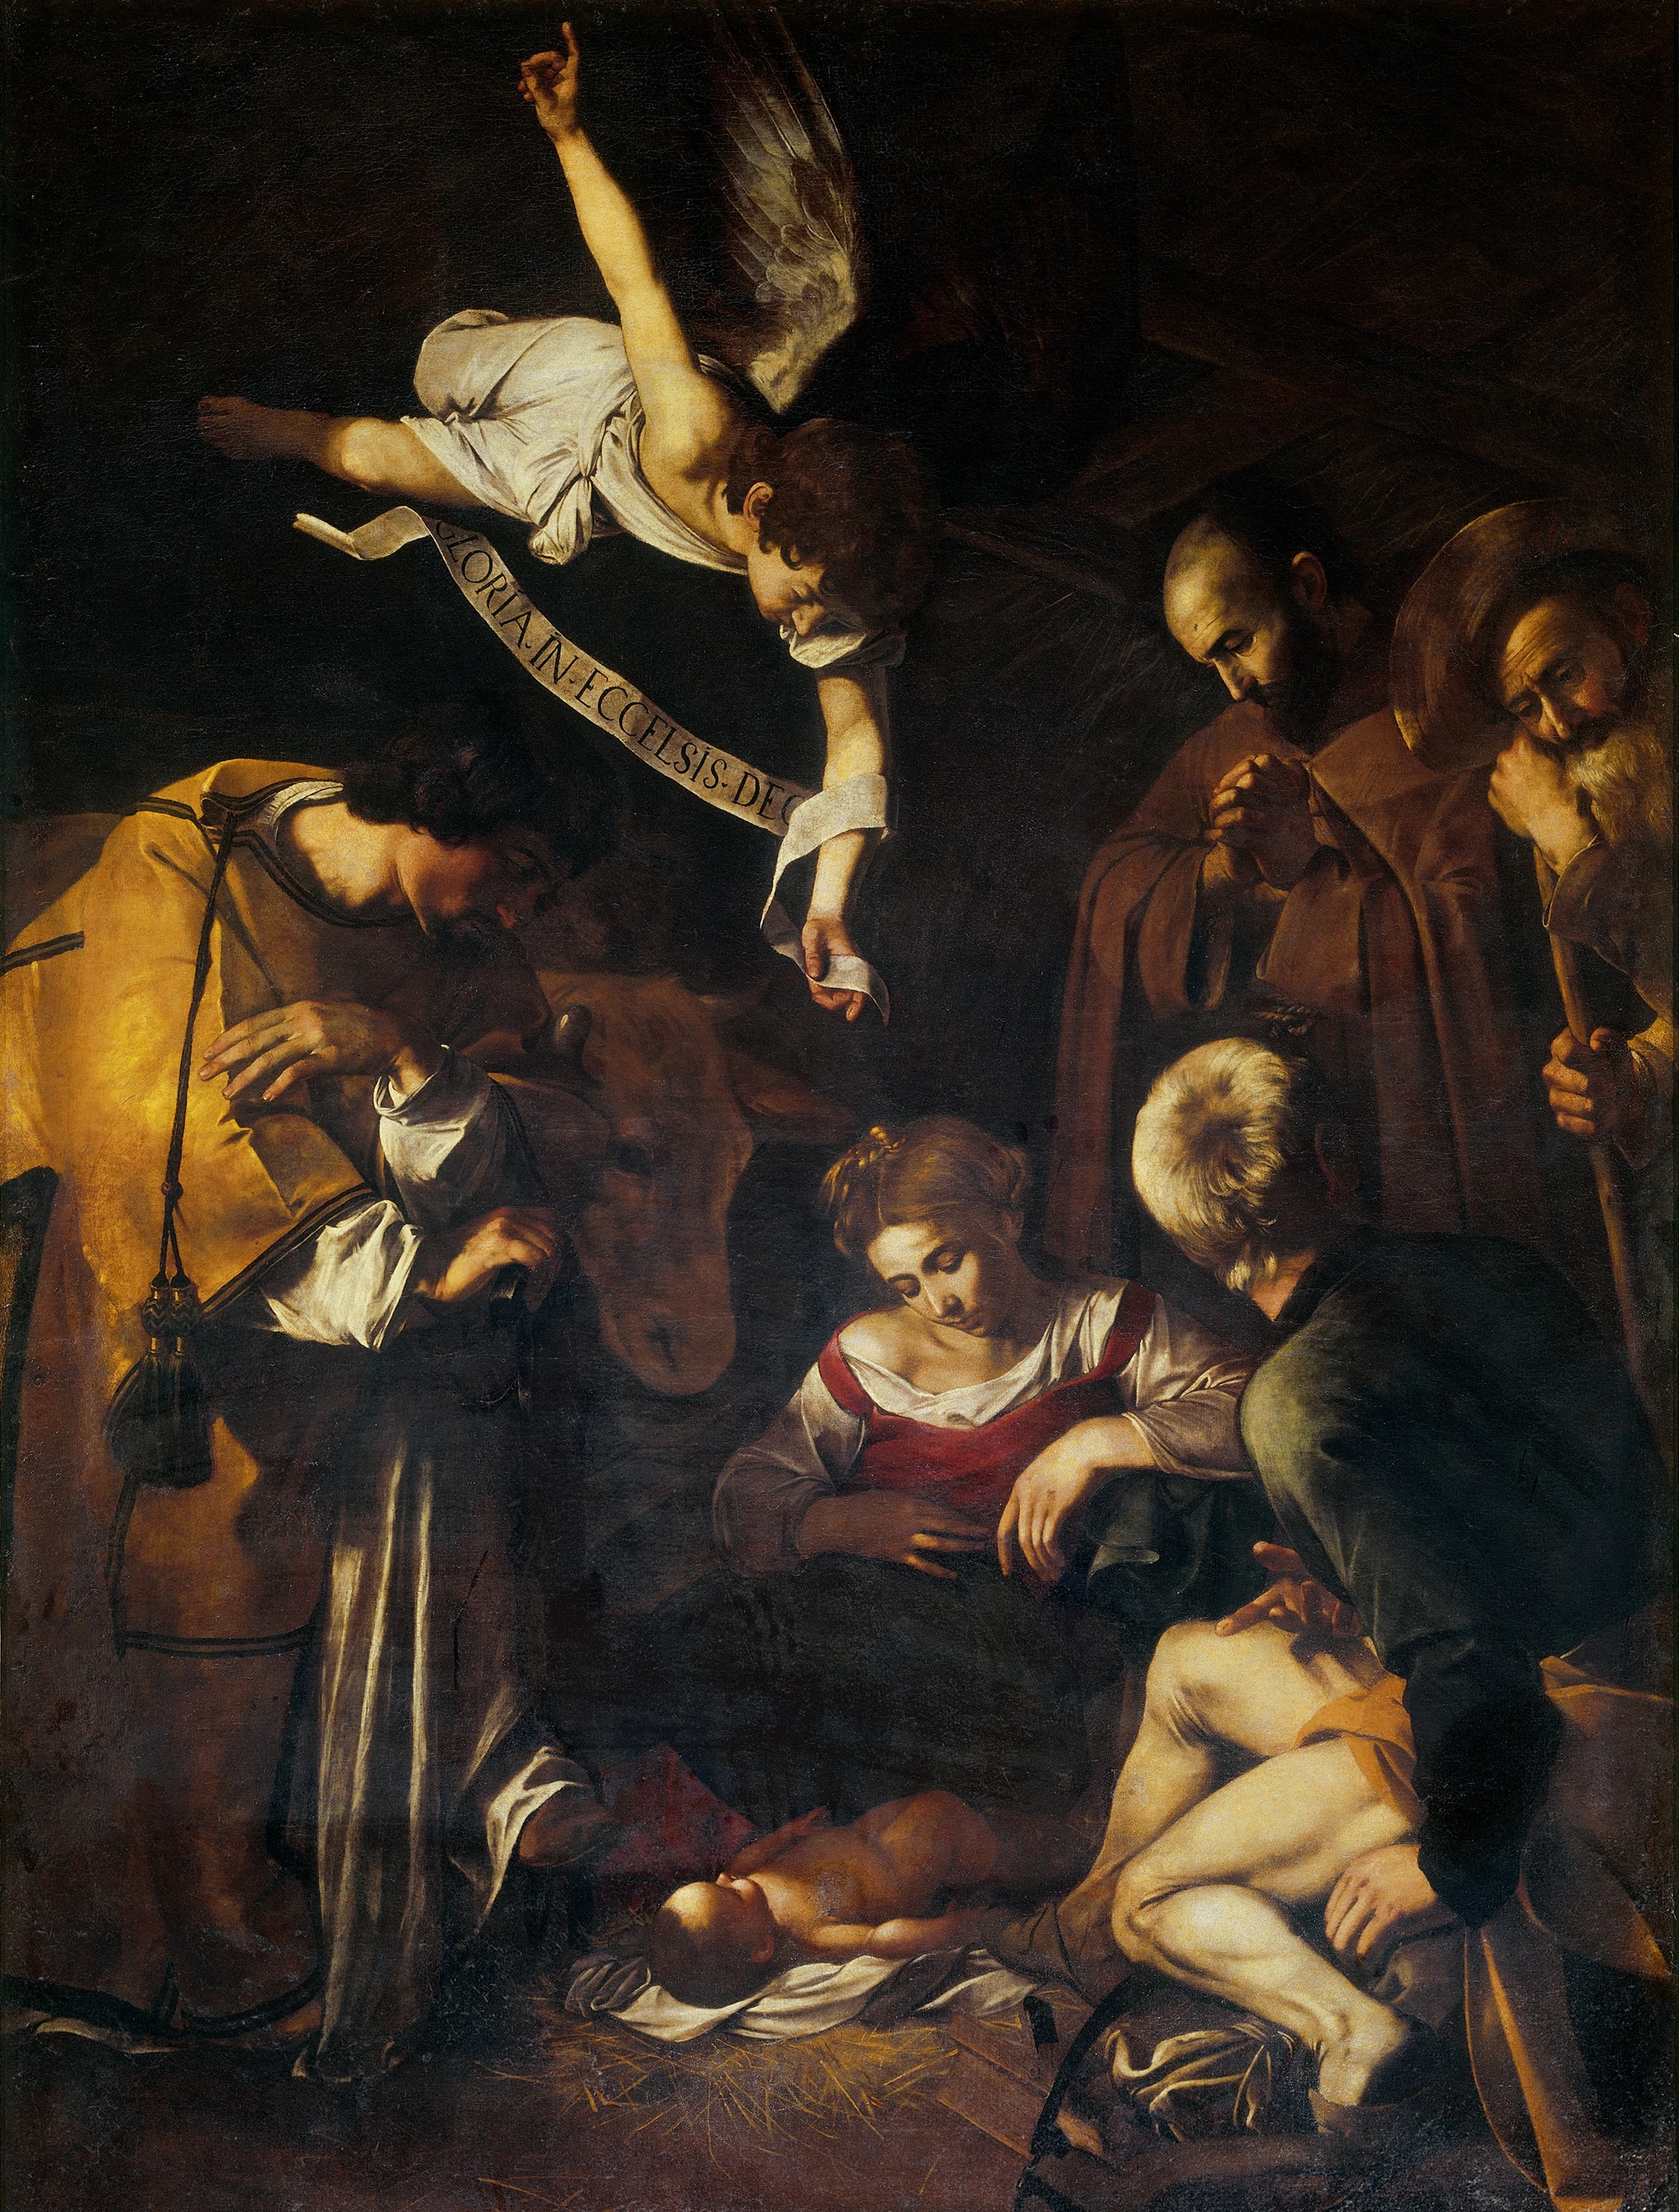 Nativity with St. Francis and St. Lawrence, Caravaggio